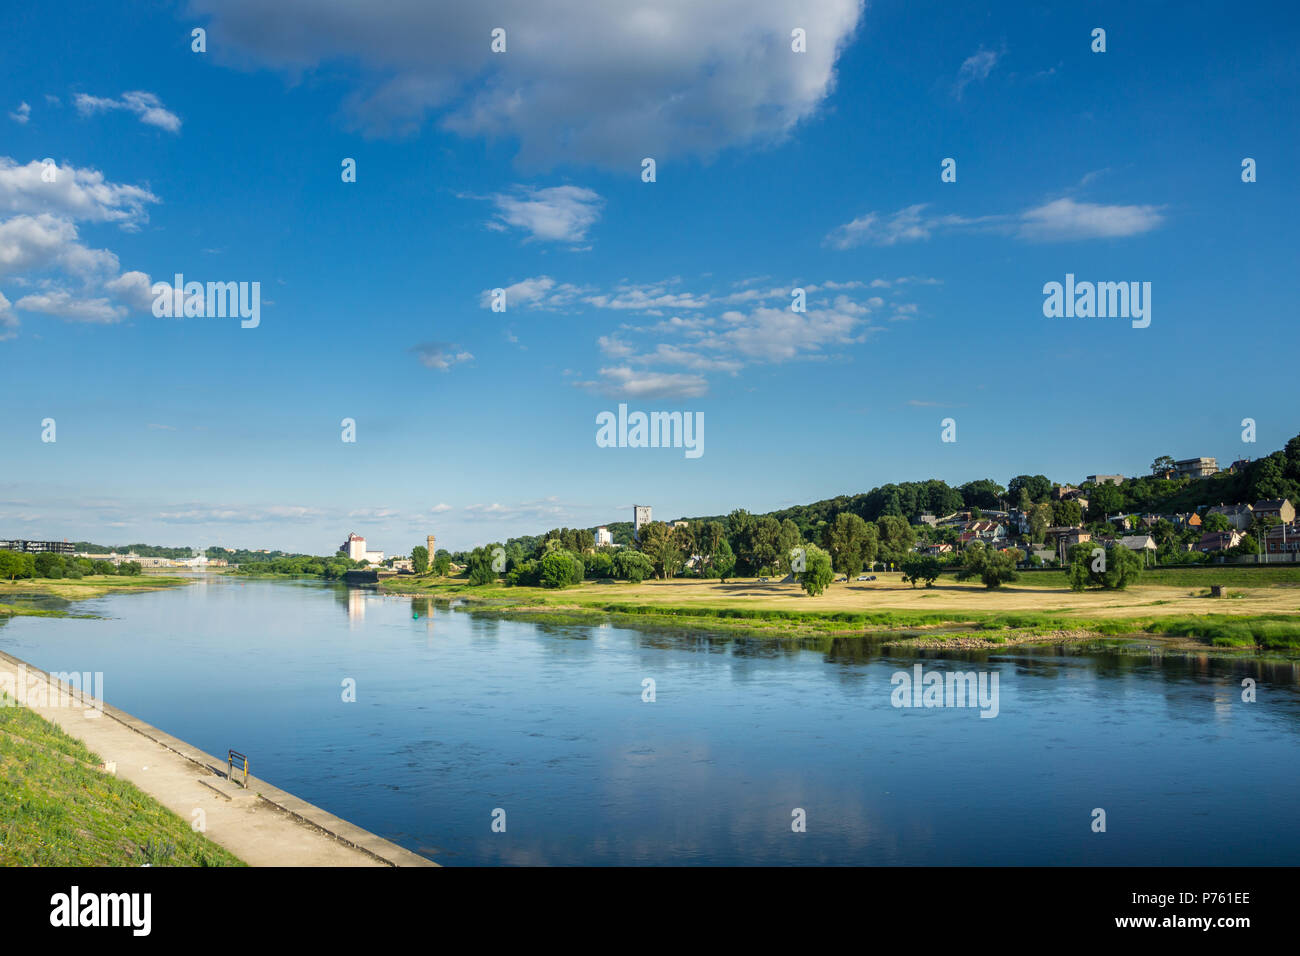 Lithuania, Sky and houses reflecting in river of Kaunas Stock Photo